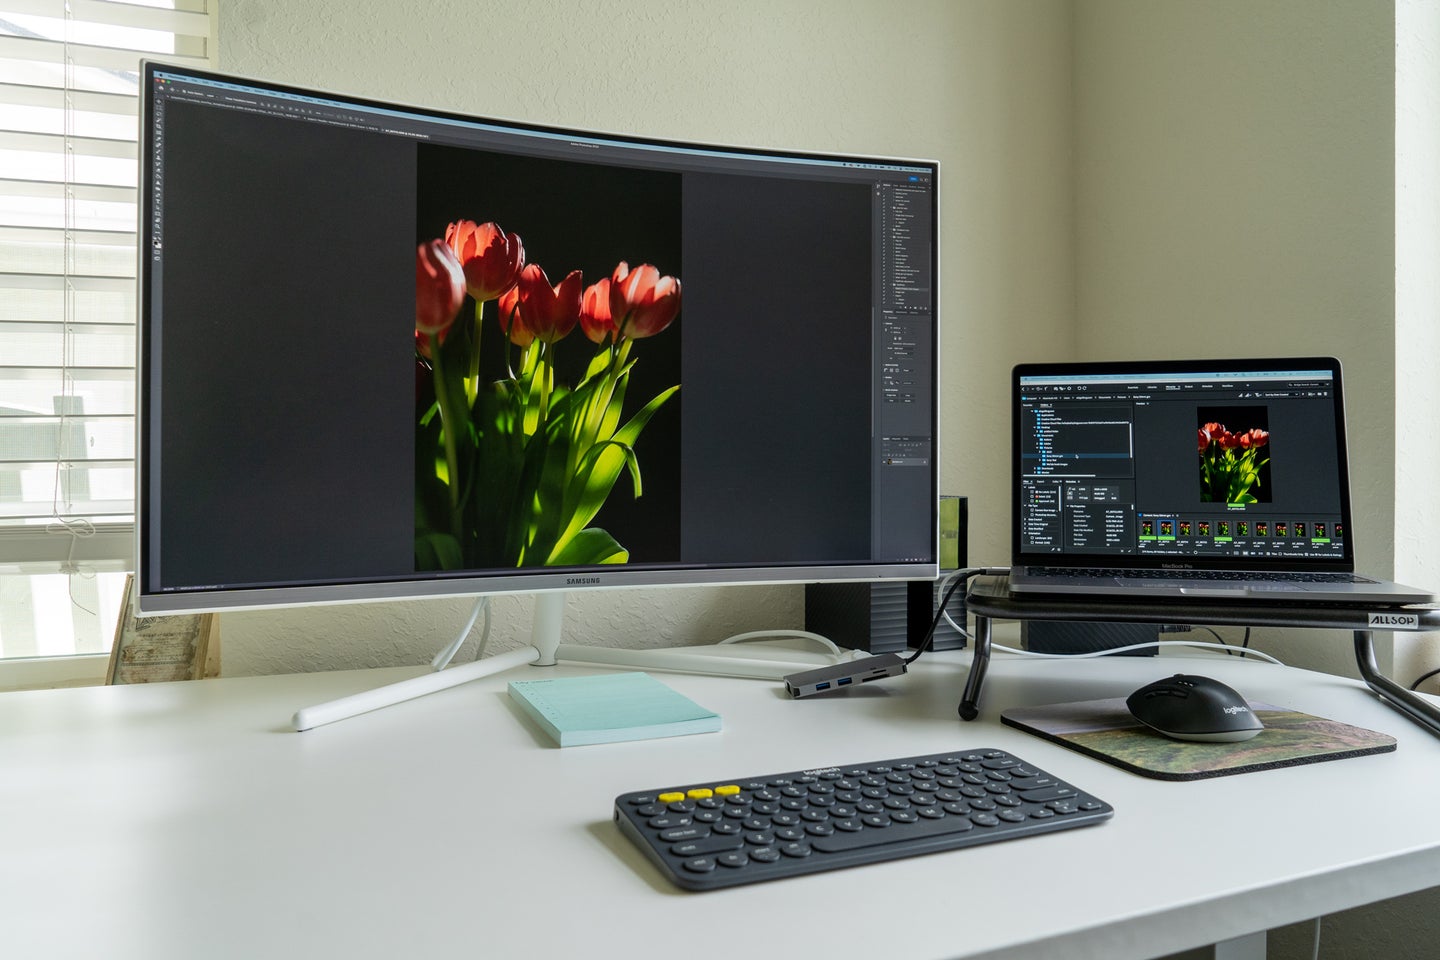 A desk with a monitor and laptop setup and Adobe Photoshop on the display.